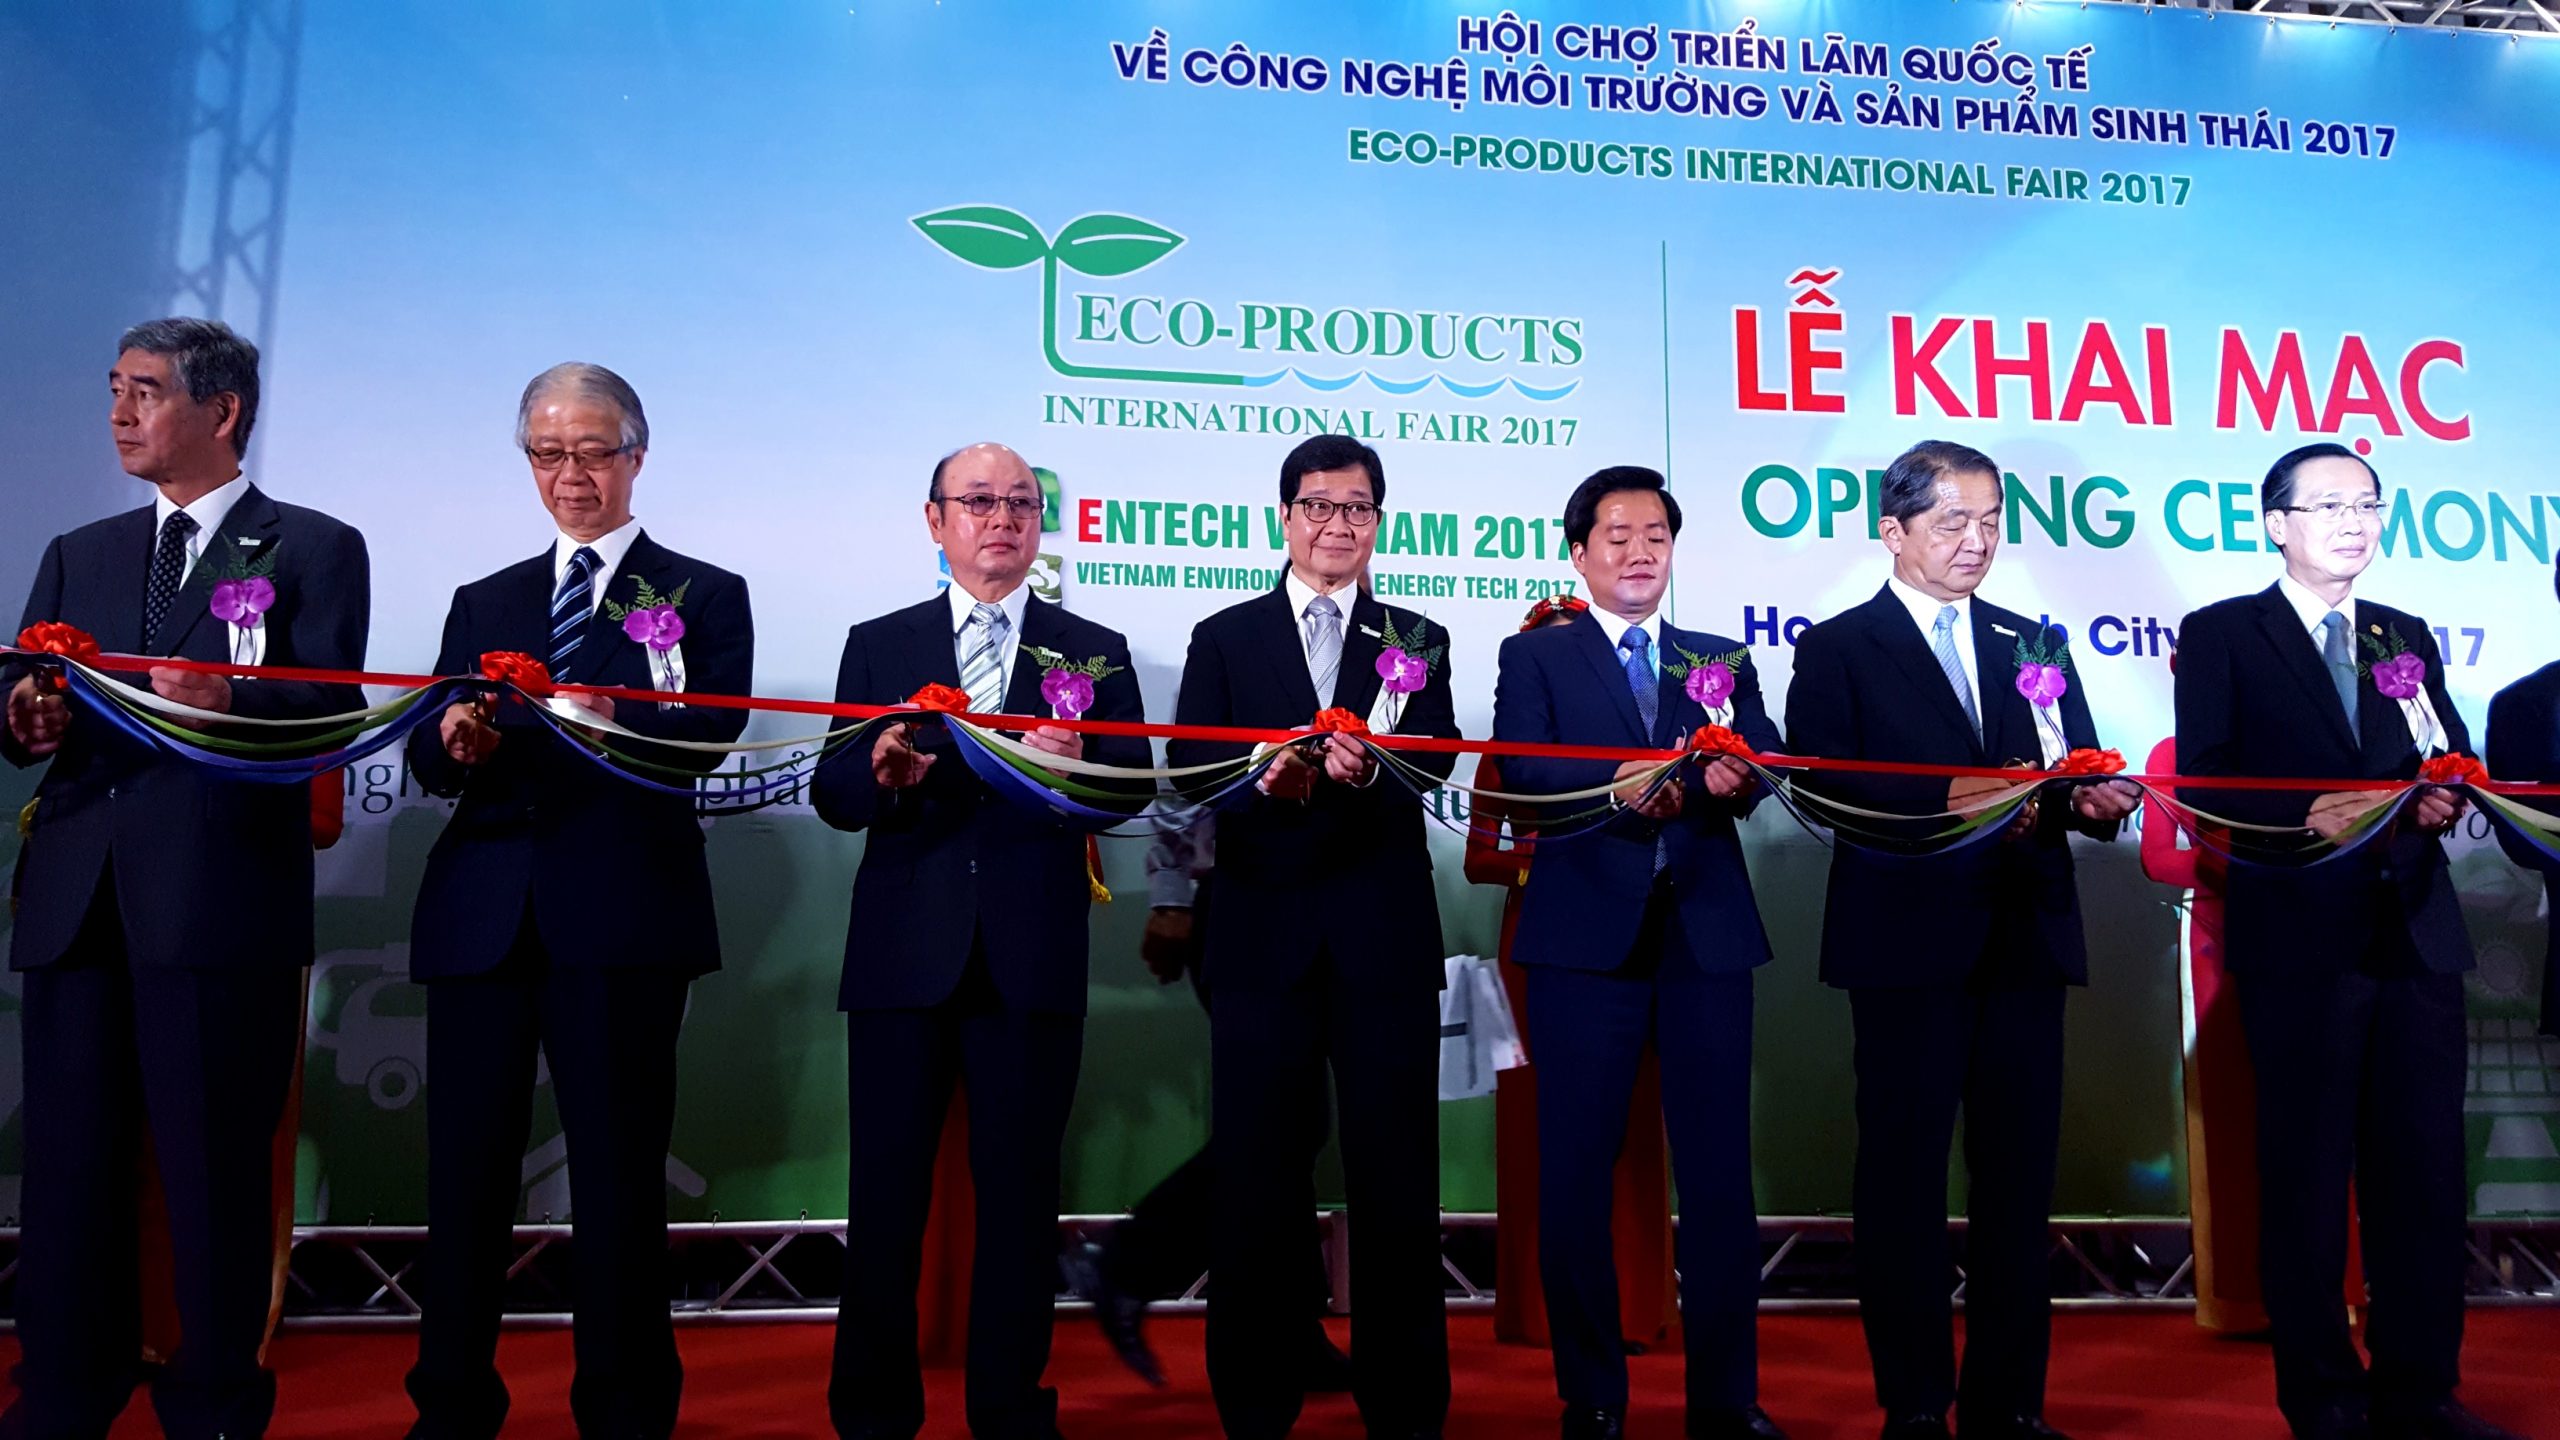 The 11th Eco-products International Fair 2017 formally declared open with the ribbon cutting by the dignitaries.